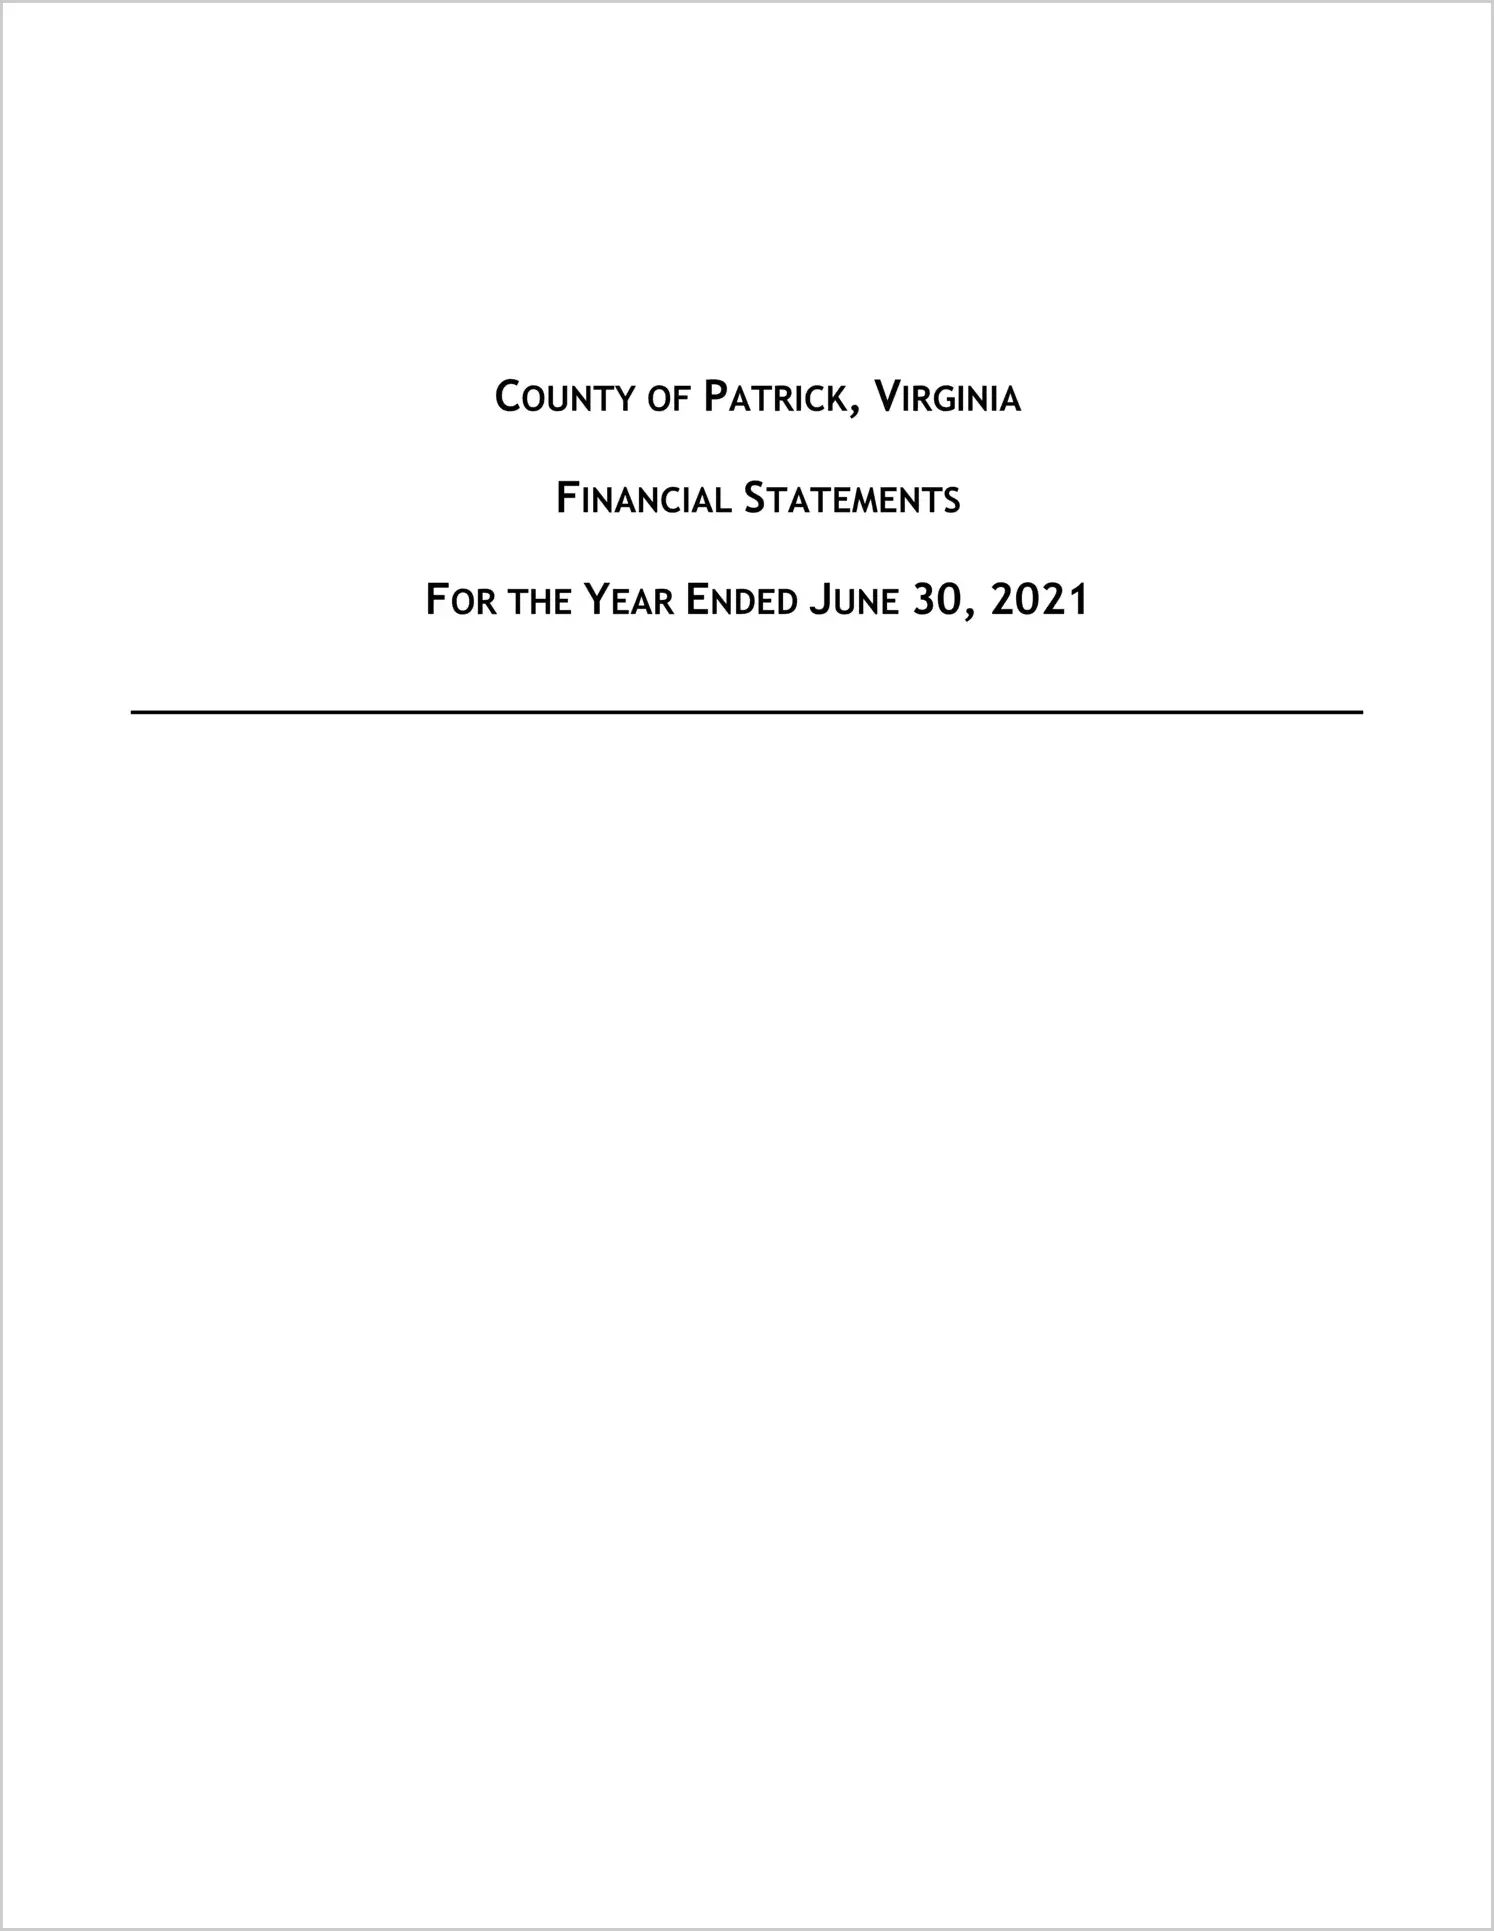 2021 Annual Financial Report for County of Patrick